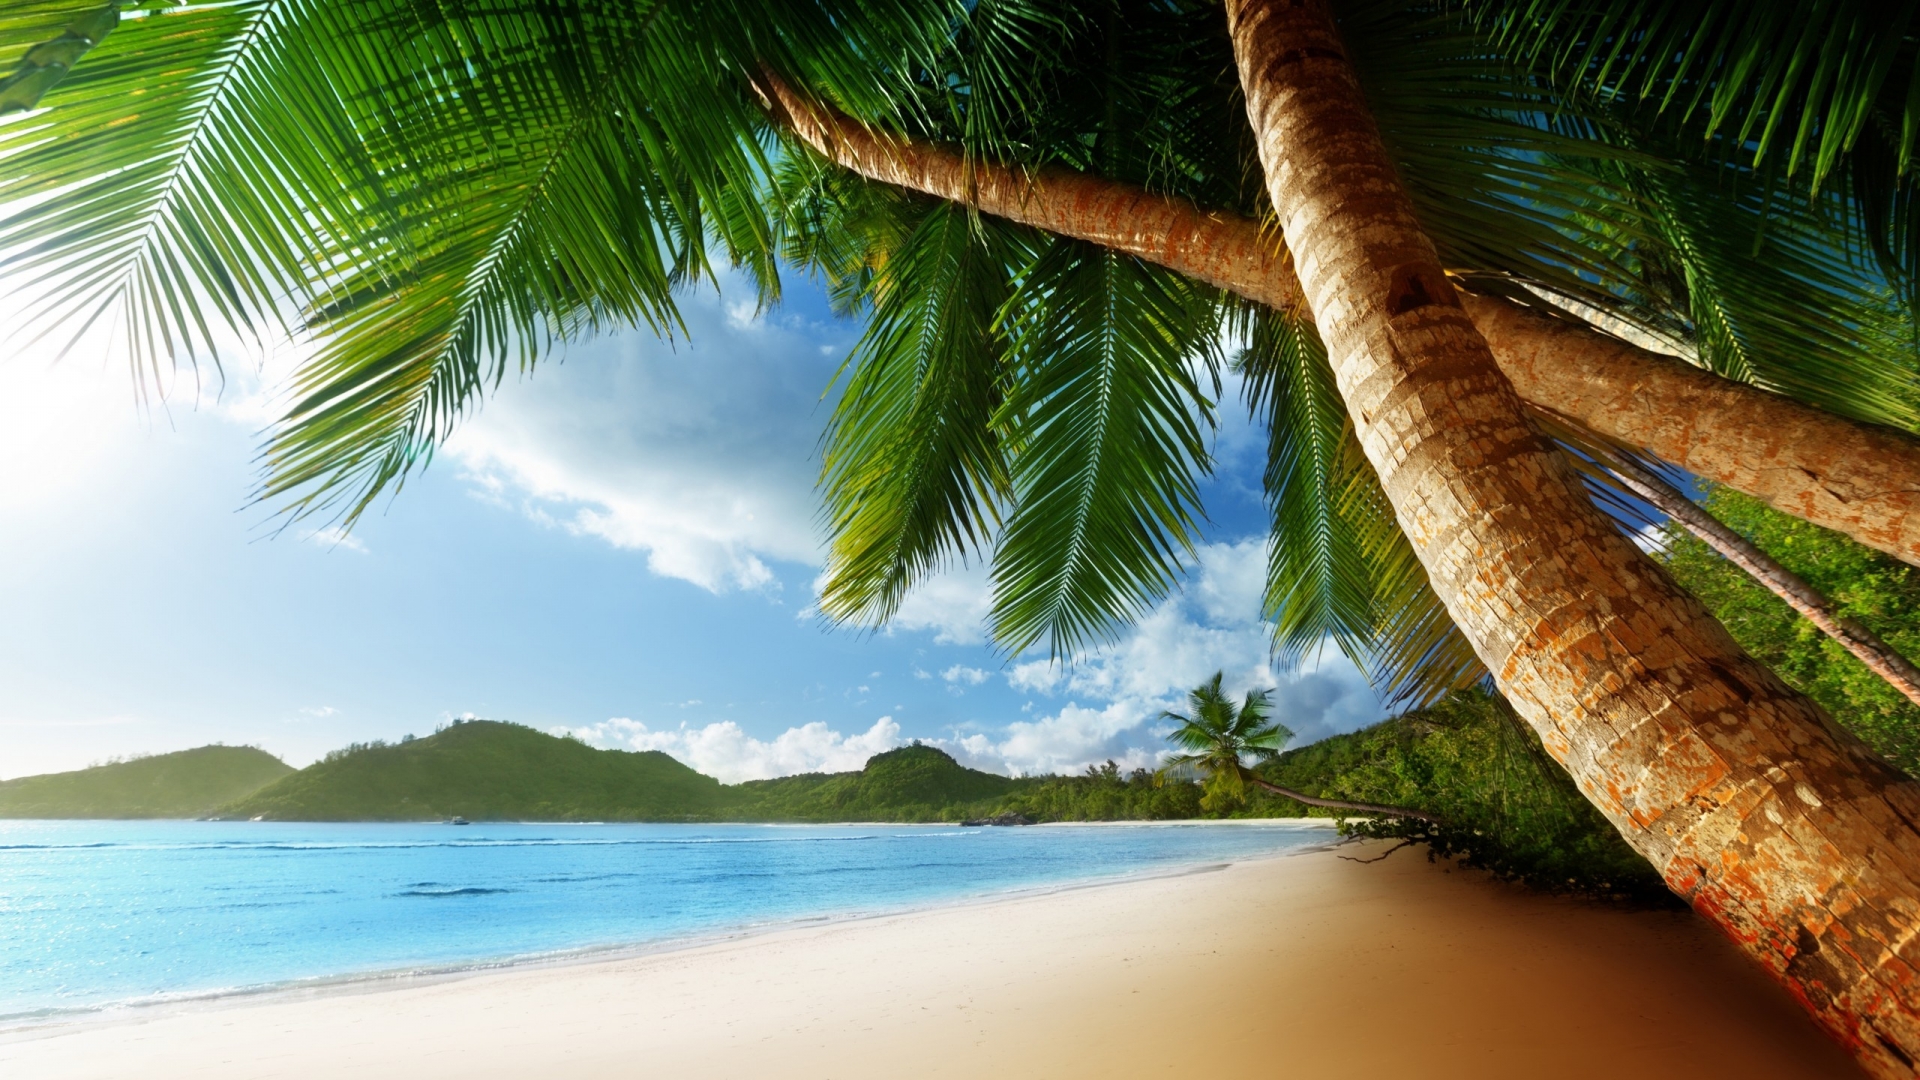 Exotic Palm Island for 1920 x 1080 HDTV 1080p resolution